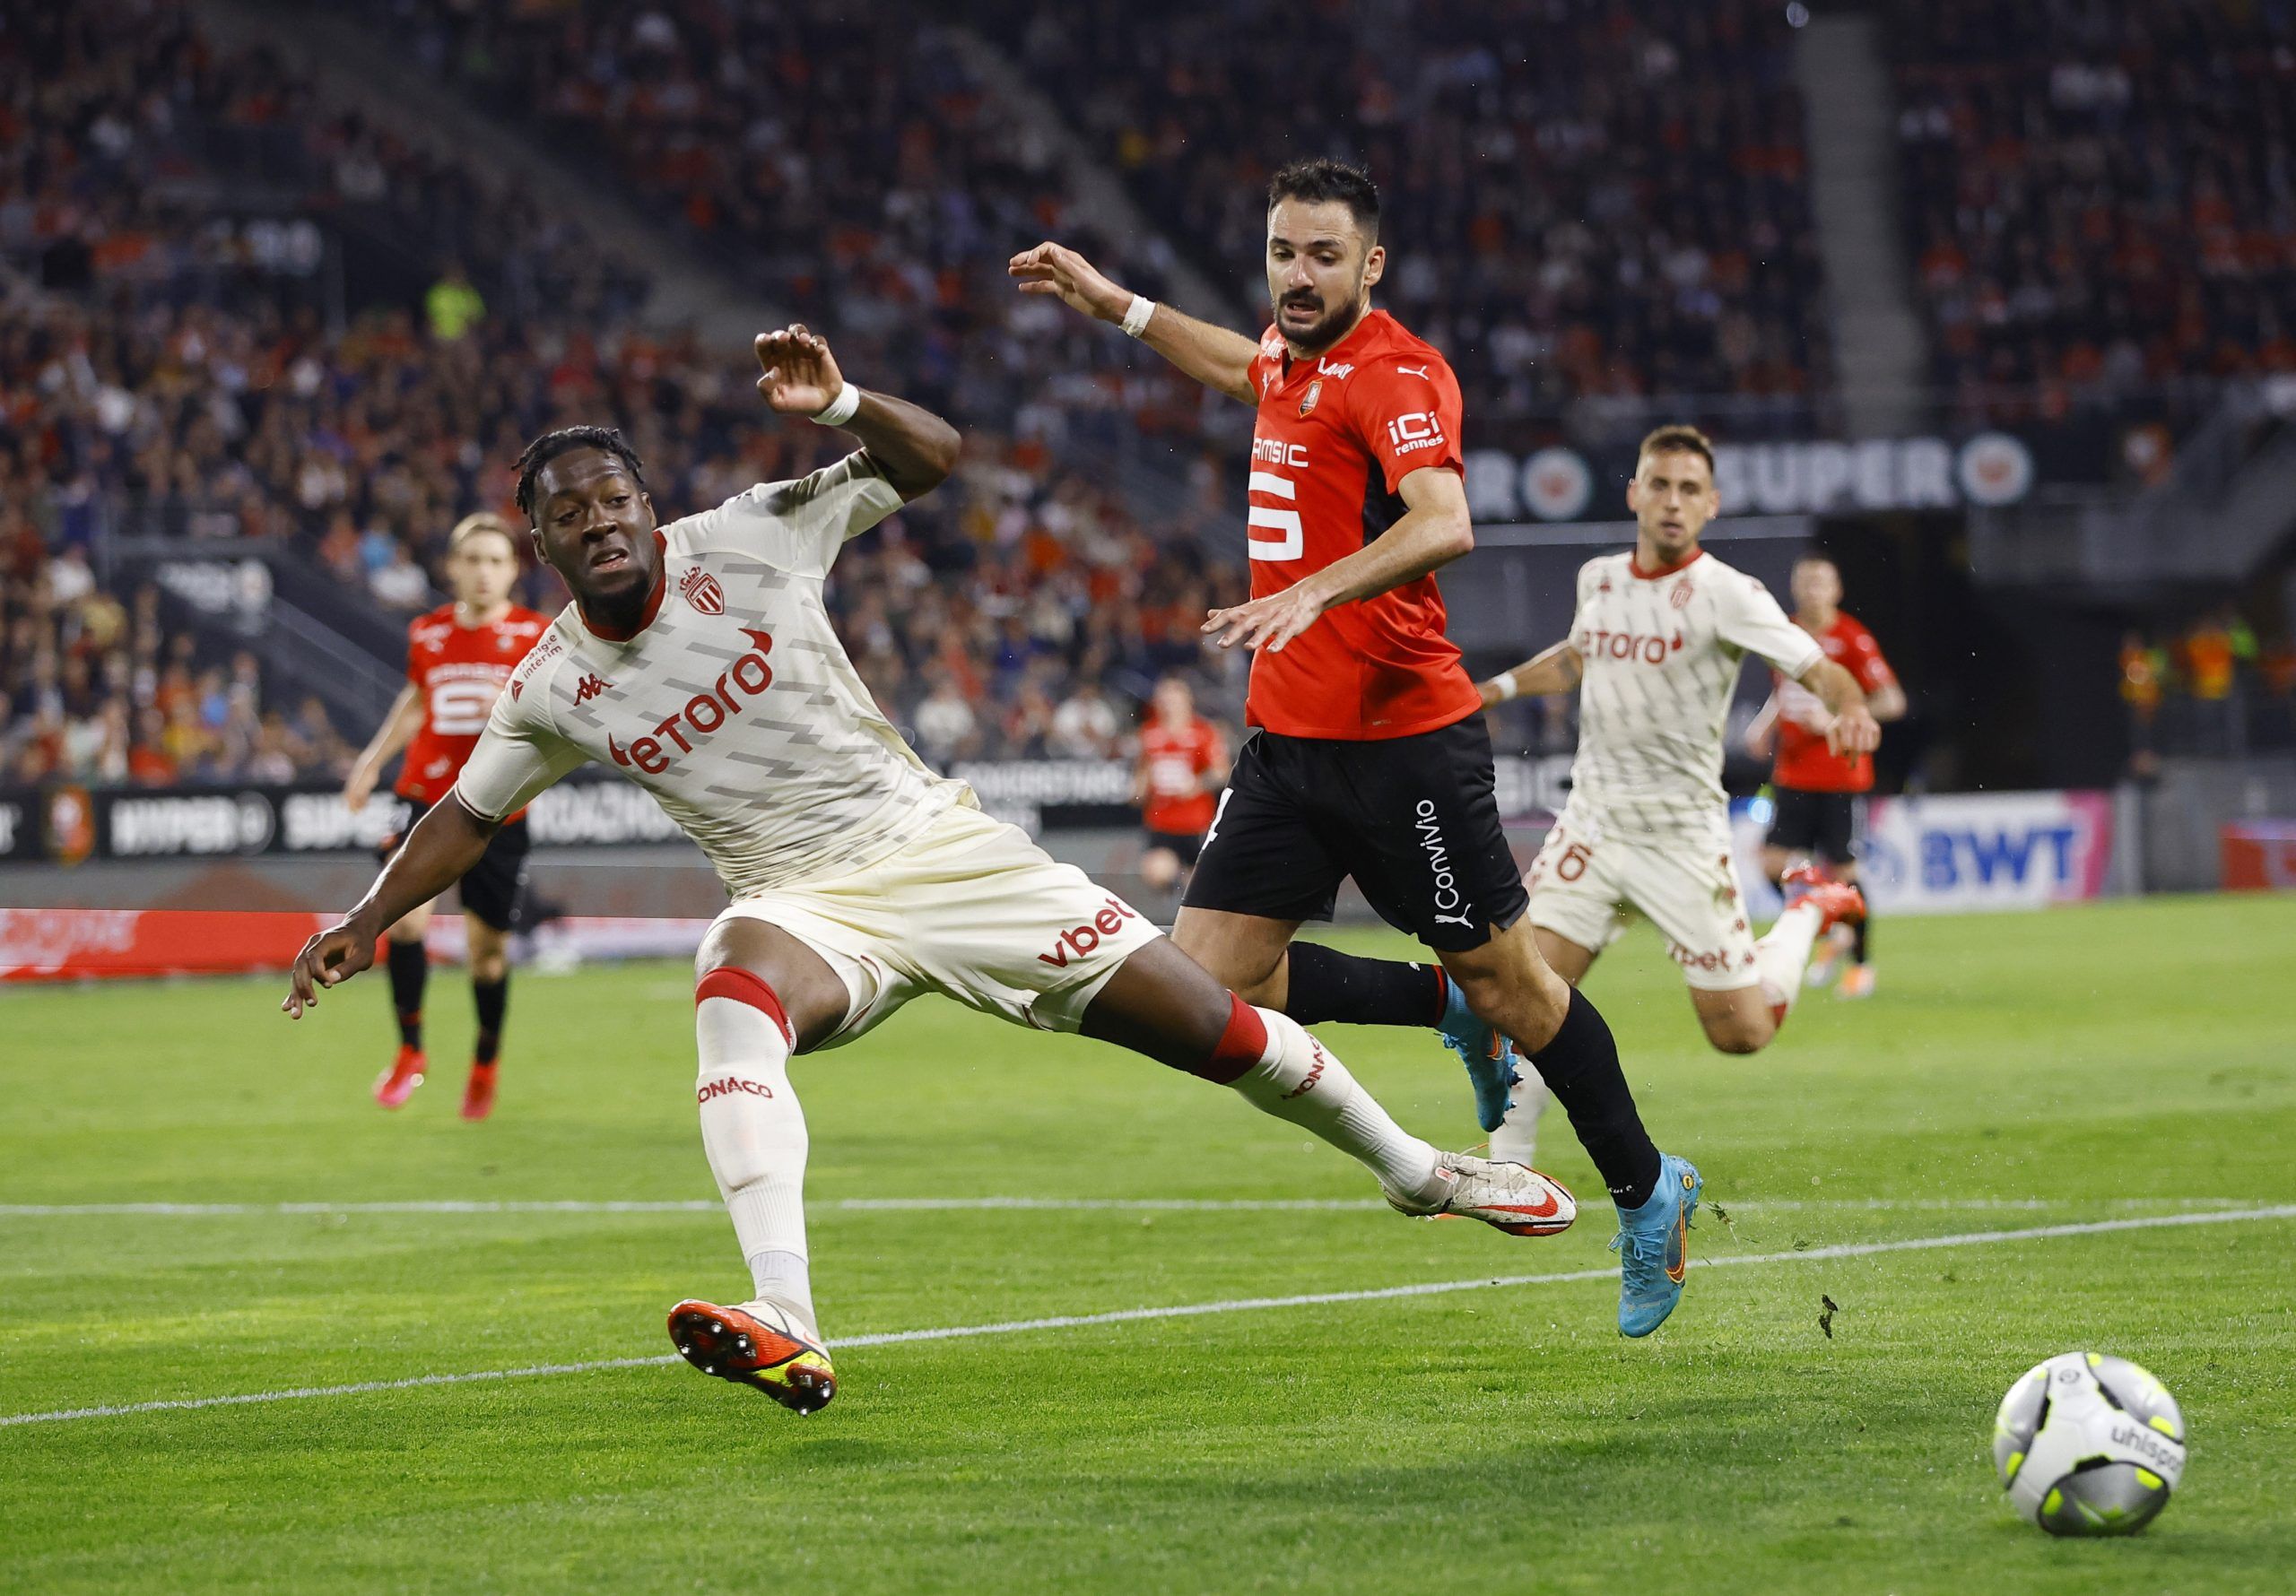 Soccer Football - Ligue 1 - Stade Rennes v AS Monaco - Roazhon Park, Rennes, France - April 15, 2022 AS Monaco's Axel Disasi in action with Stade Rennes' Gaetan Laborde REUTERS/Stephane Mahe